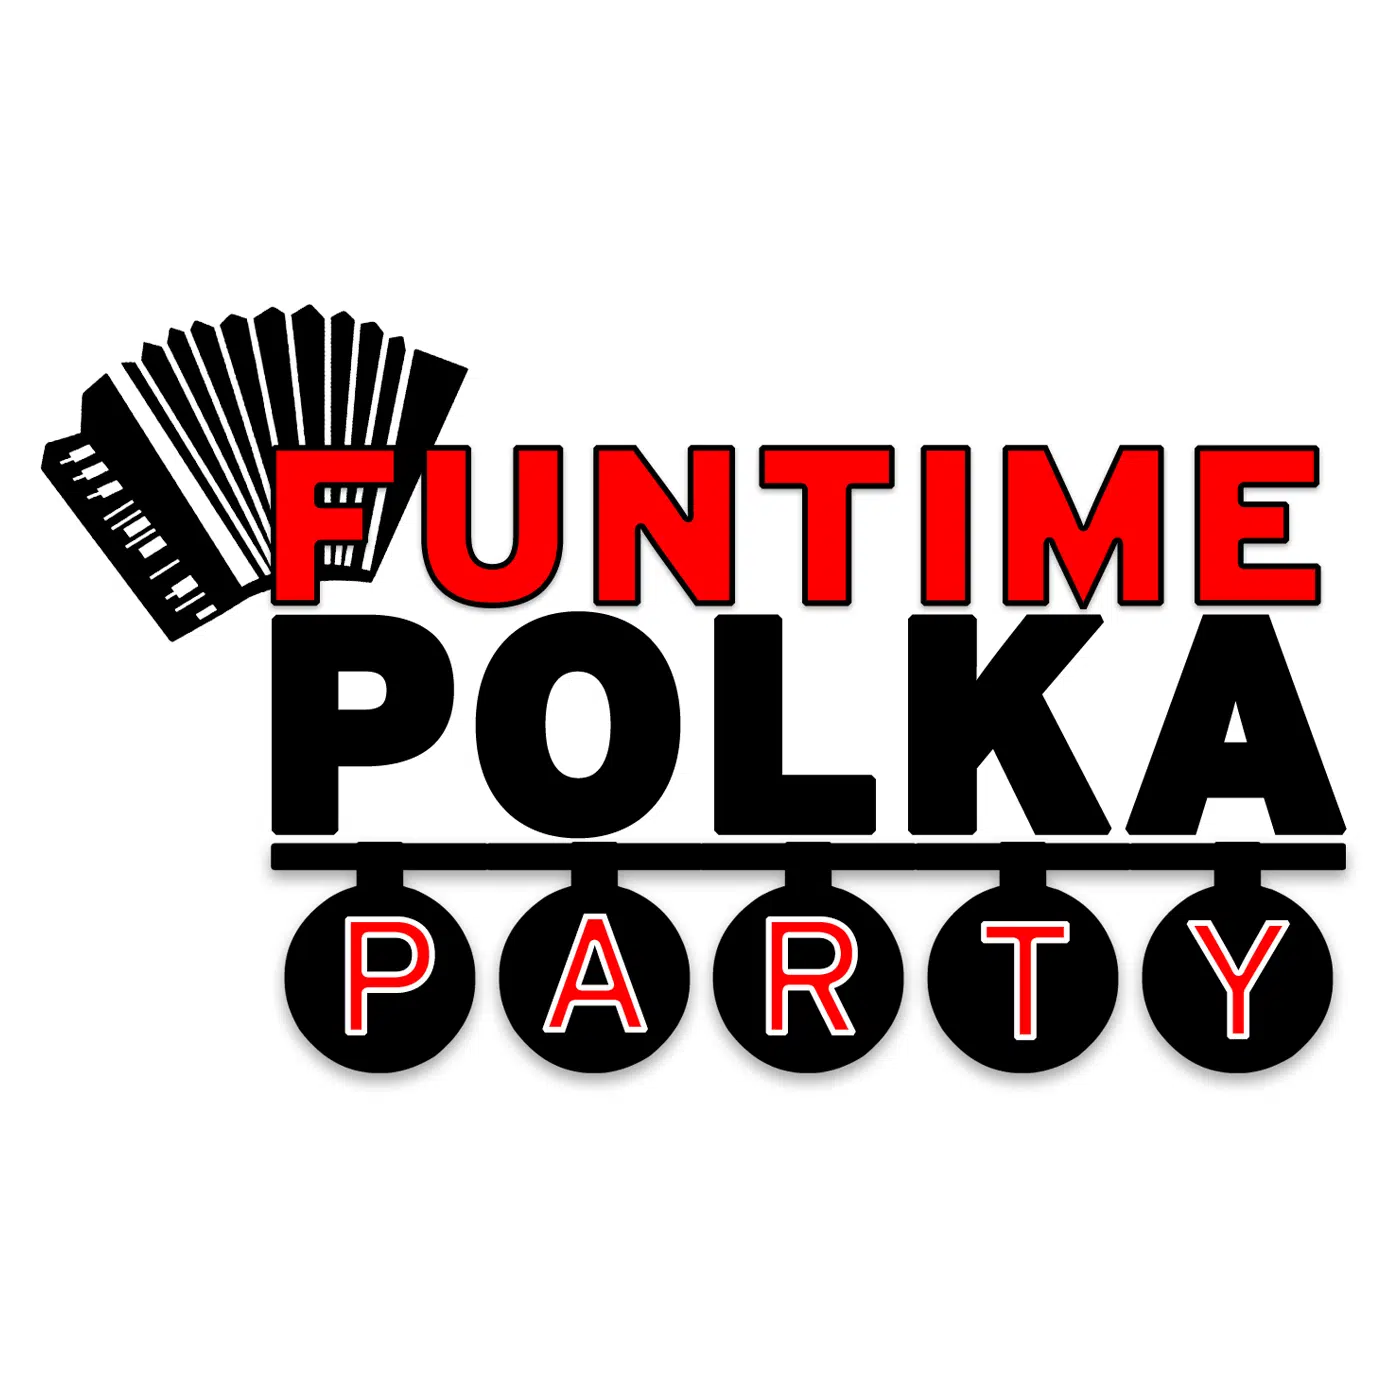 The Funtime Polka Party